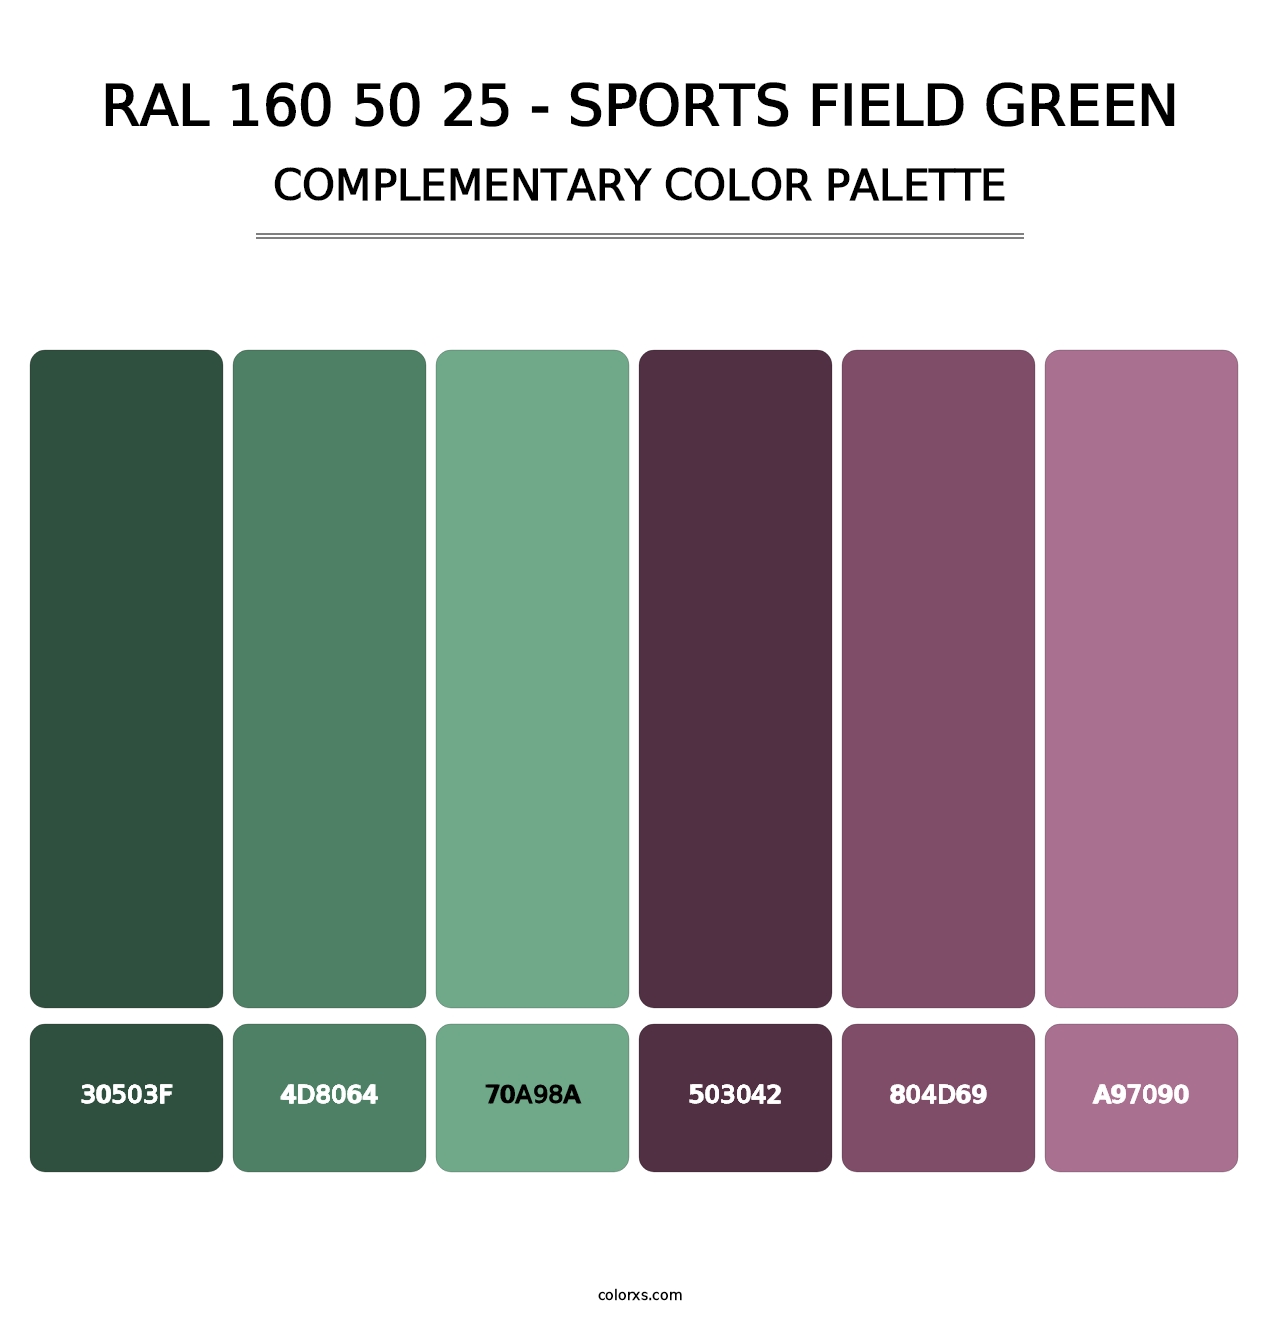 RAL 160 50 25 - Sports Field Green - Complementary Color Palette